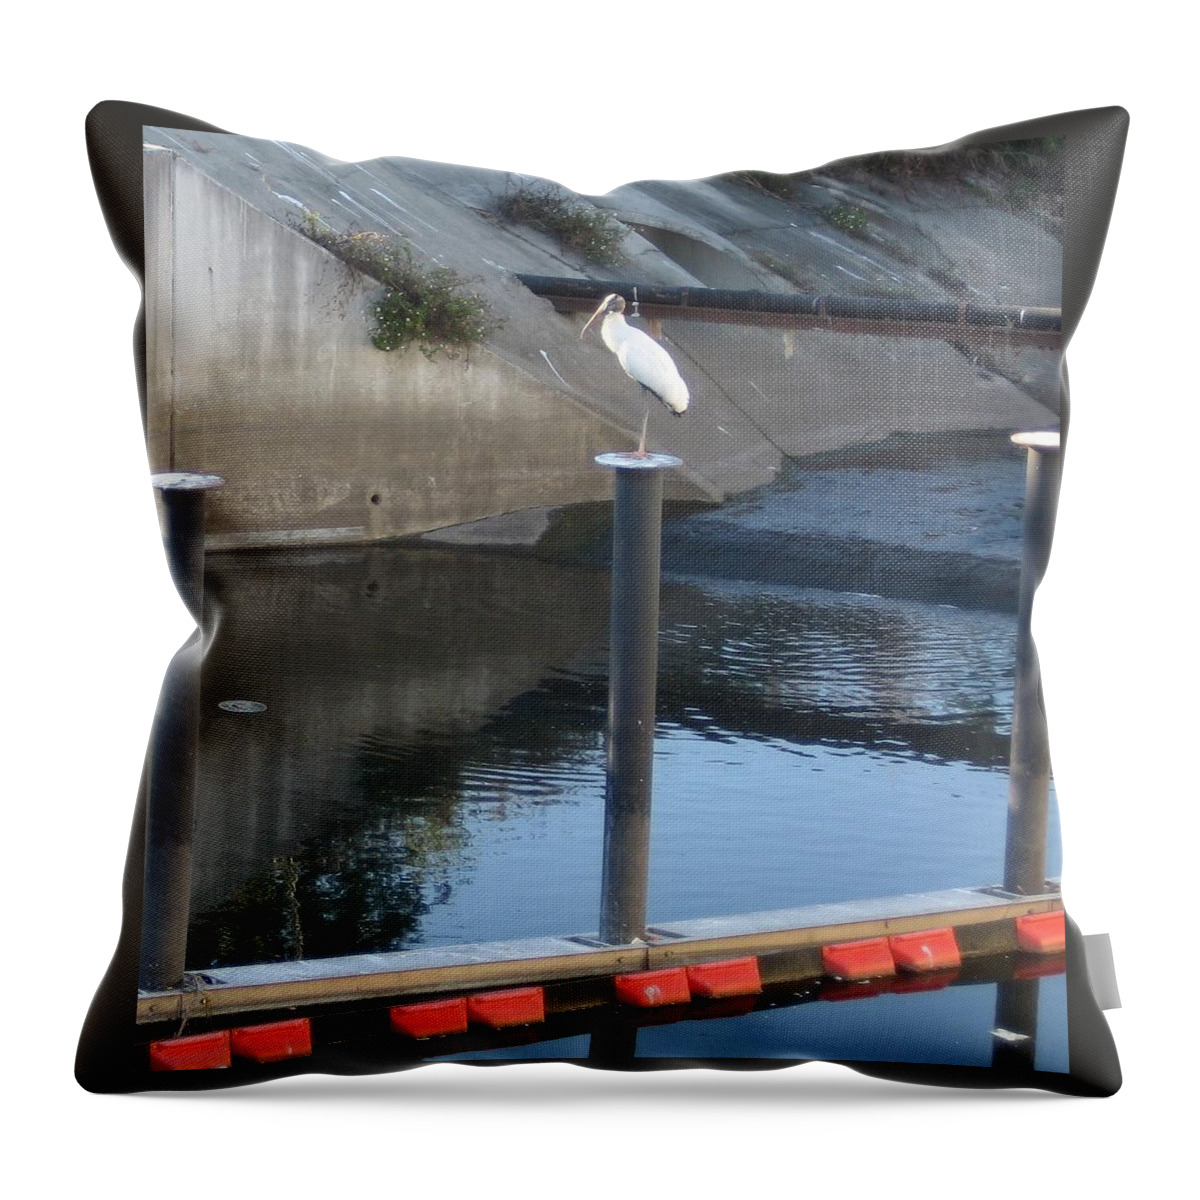 Wood Stork Throw Pillow featuring the photograph Wood Stork 1 Meander by Stephen Hawks